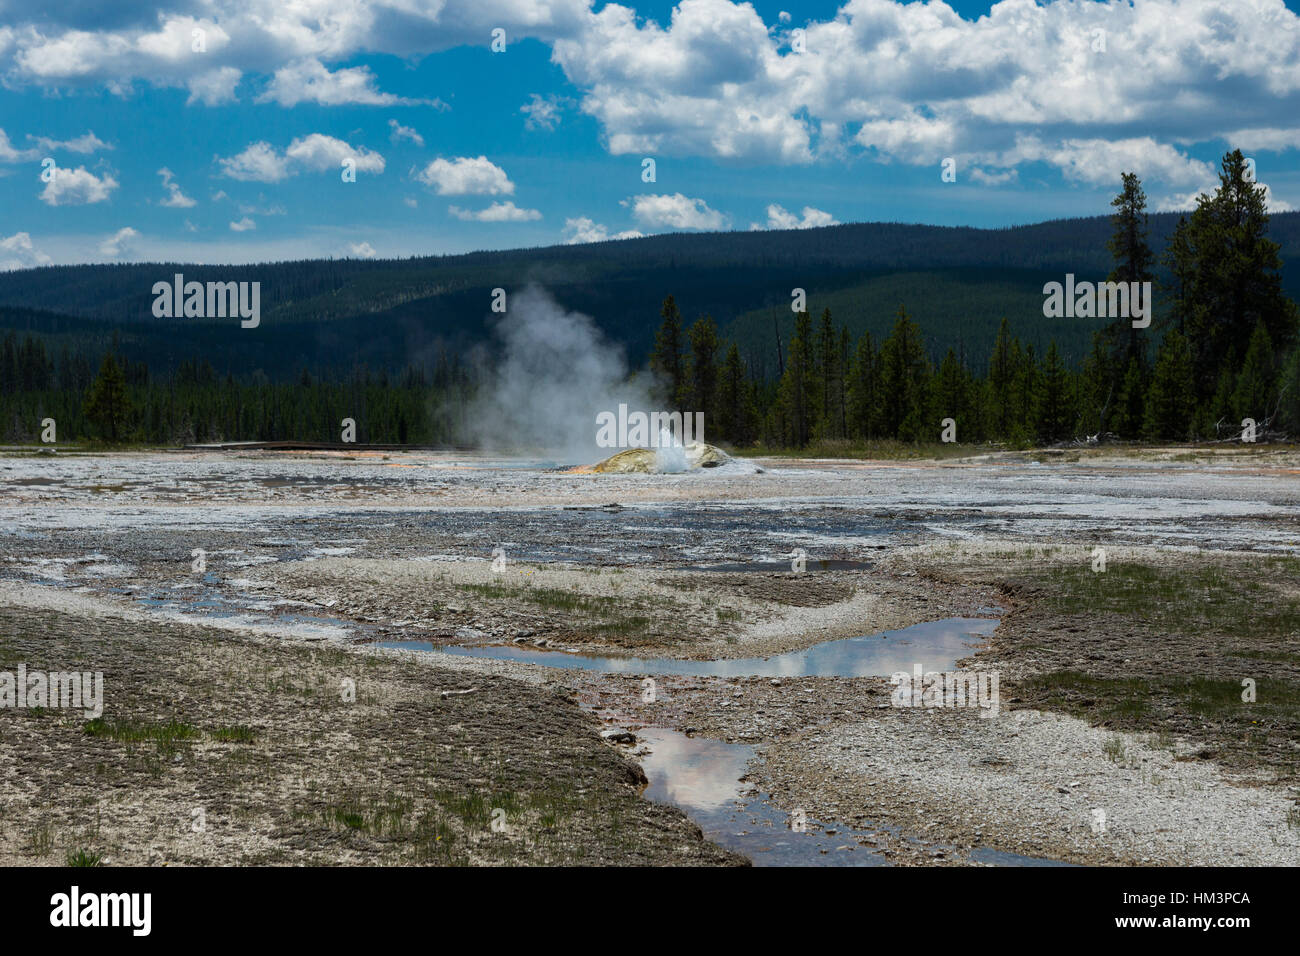 Daisy Geyser, Upper Geyser Basin, Parc National de Yellowstone, Wyoming, USA Banque D'Images